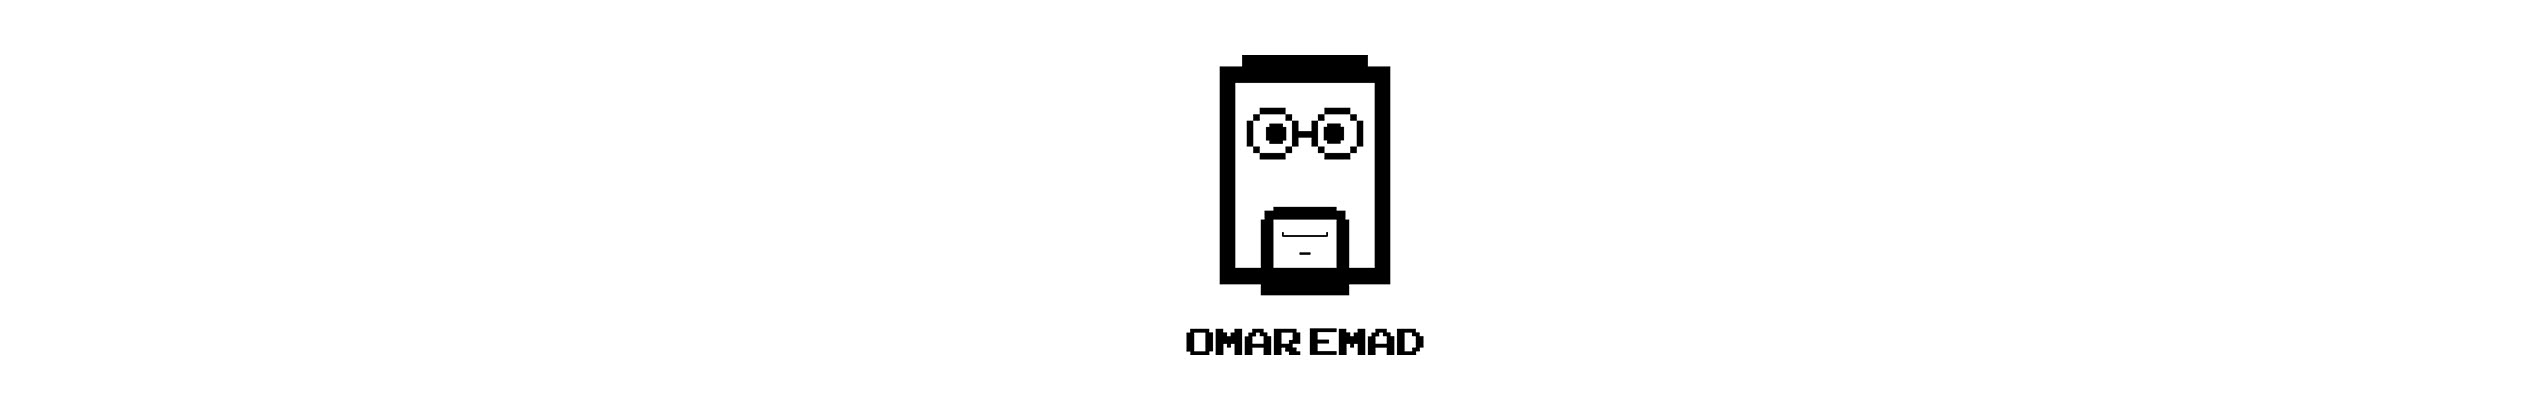 omar emad's profile banner